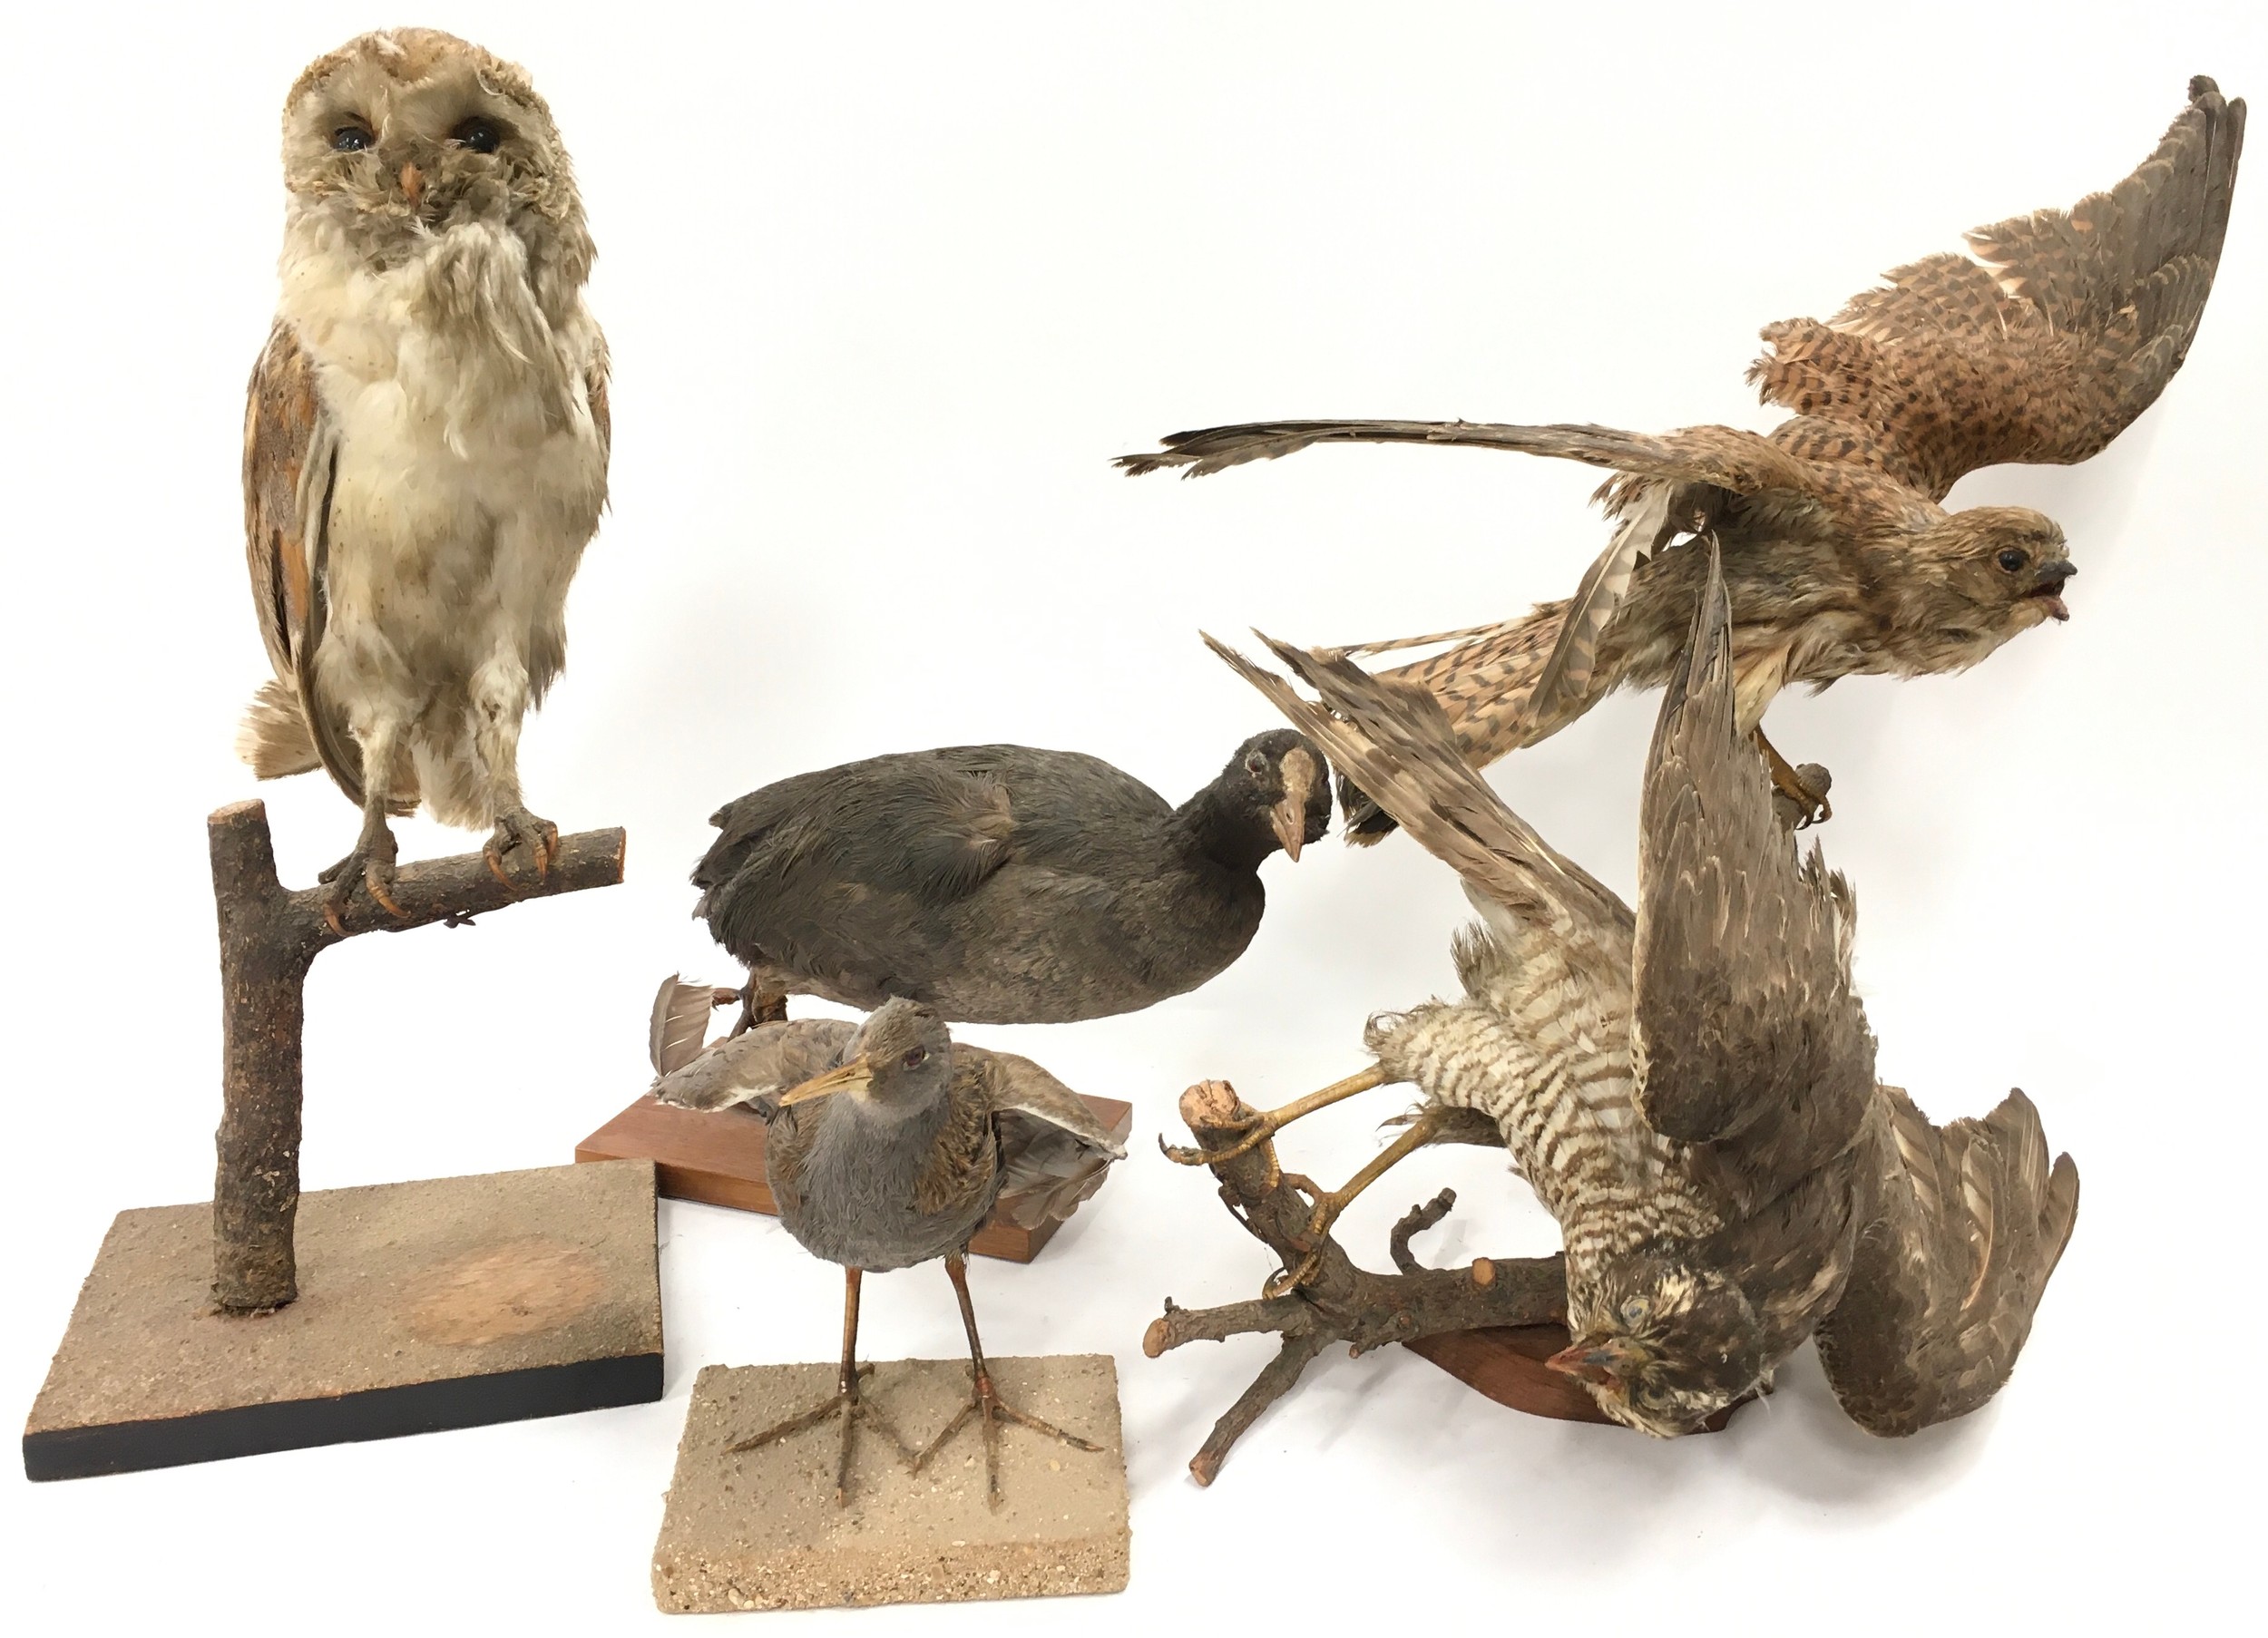 Collection of Taxidermy studies of various birds to include an Owl, duck and others (5).